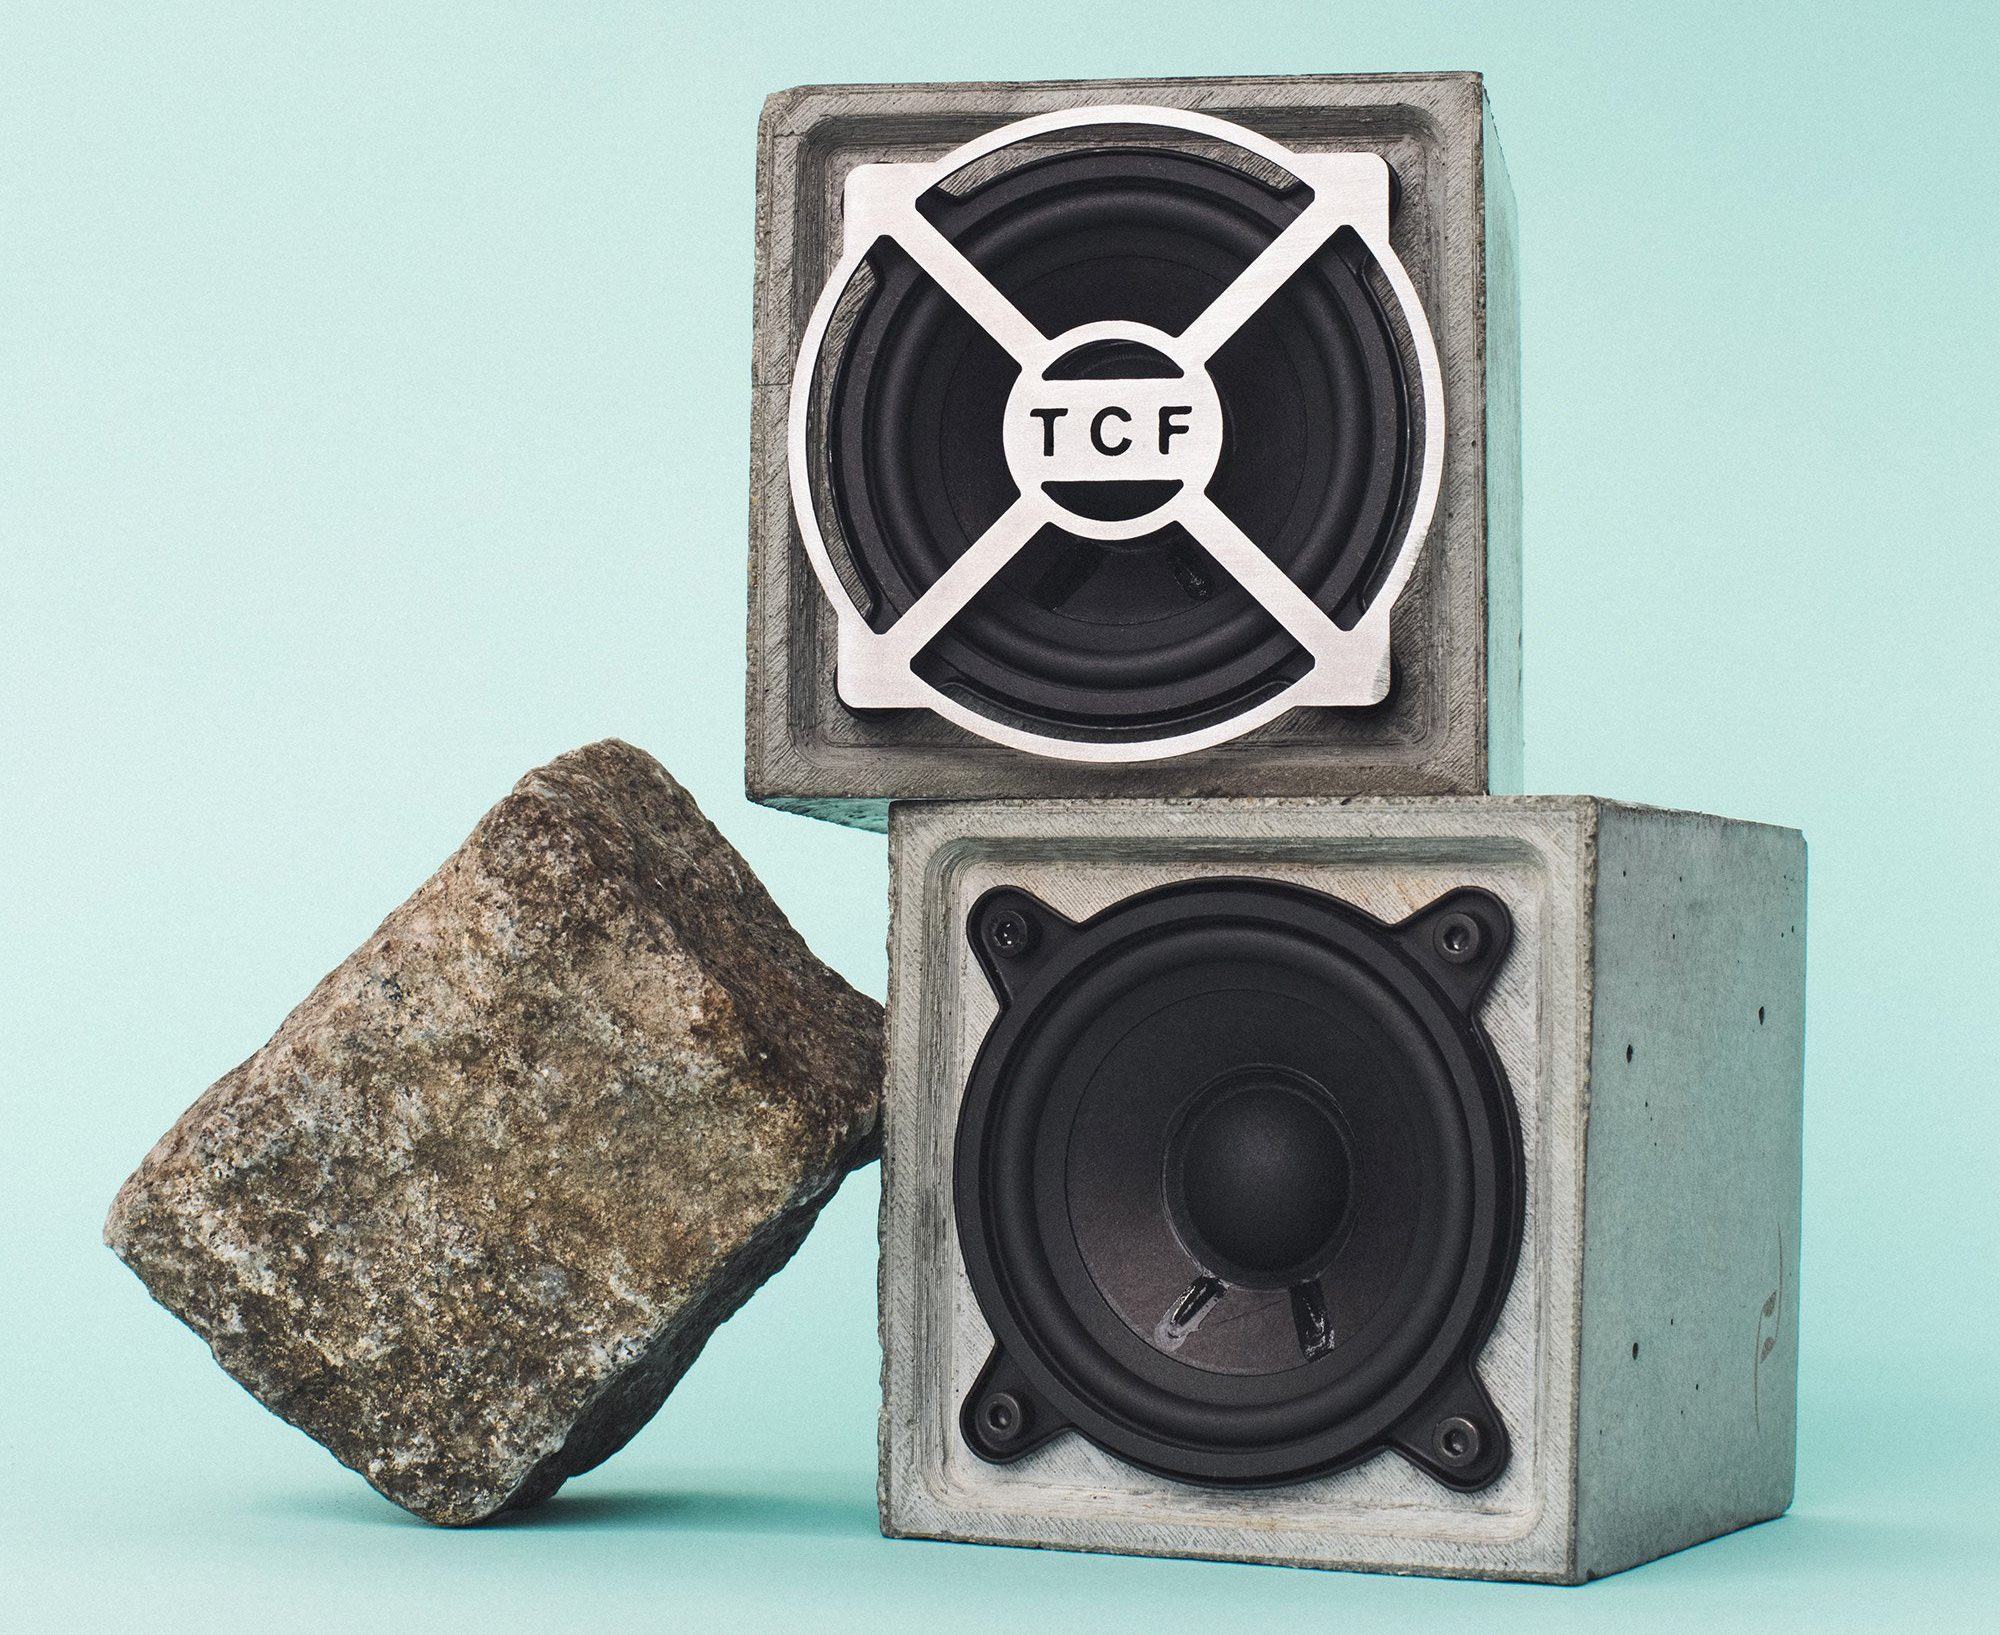 Let’s put a Bluetooth speaker in concrete, said no one ever